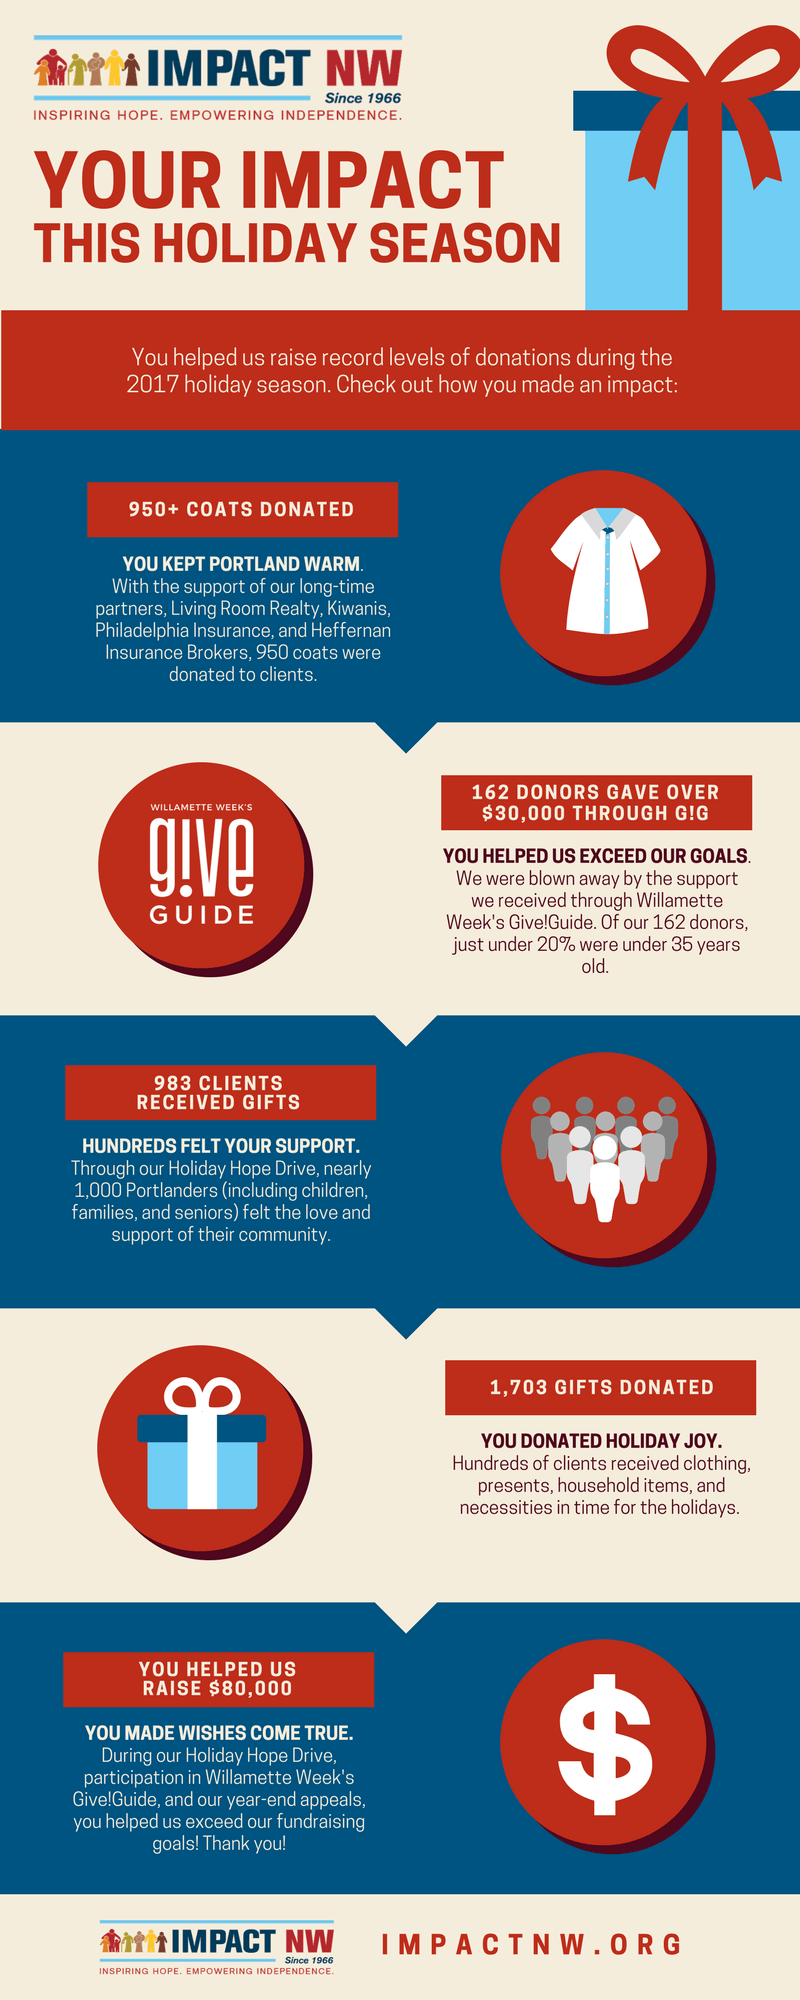 Your Impact: the 2017 Holiday Season (infographic)